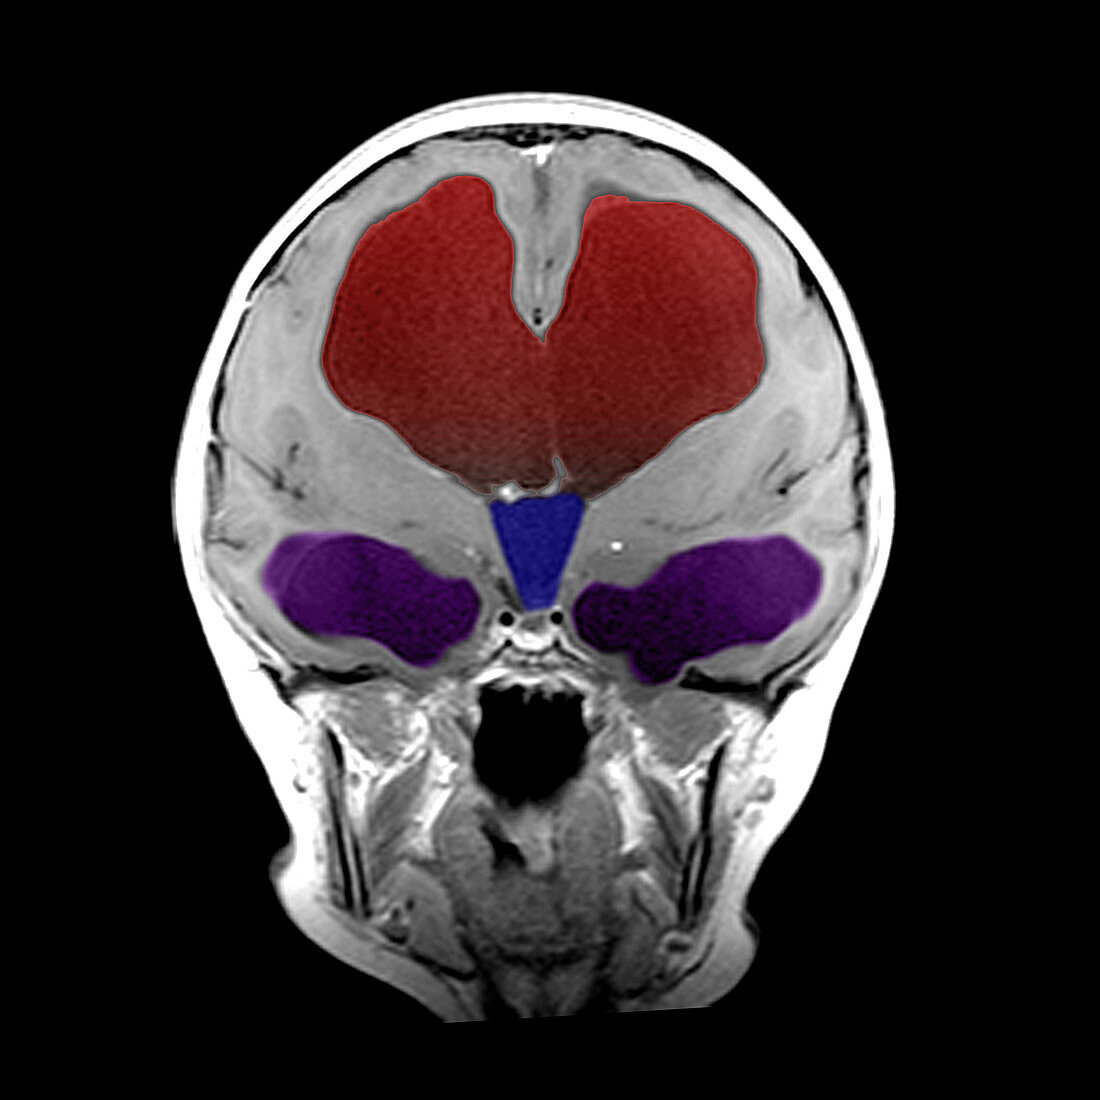 Hydrocephalus of Third Ventricle